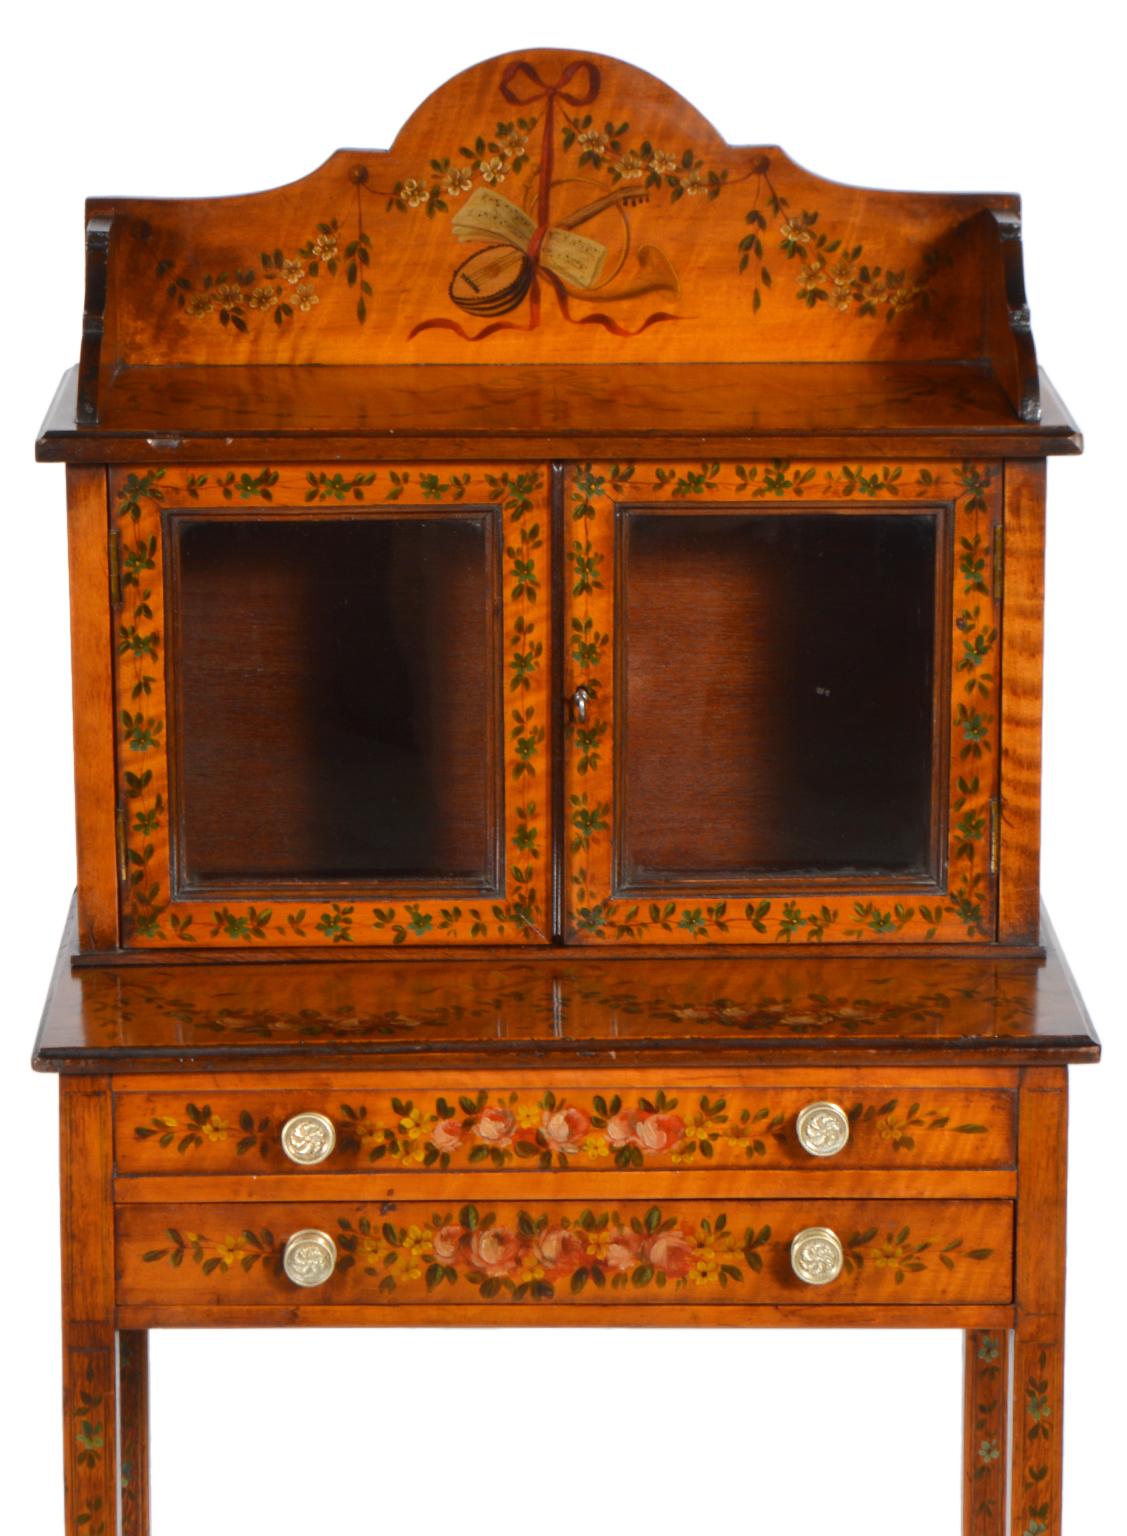 These 19th century slender display cabinets en chiffonier feature honey colored satinwood painted with flowers, ribbons and classical themes on all three sides. The long tapering legs are joined by a lower shaped shelf and supporting the upper part